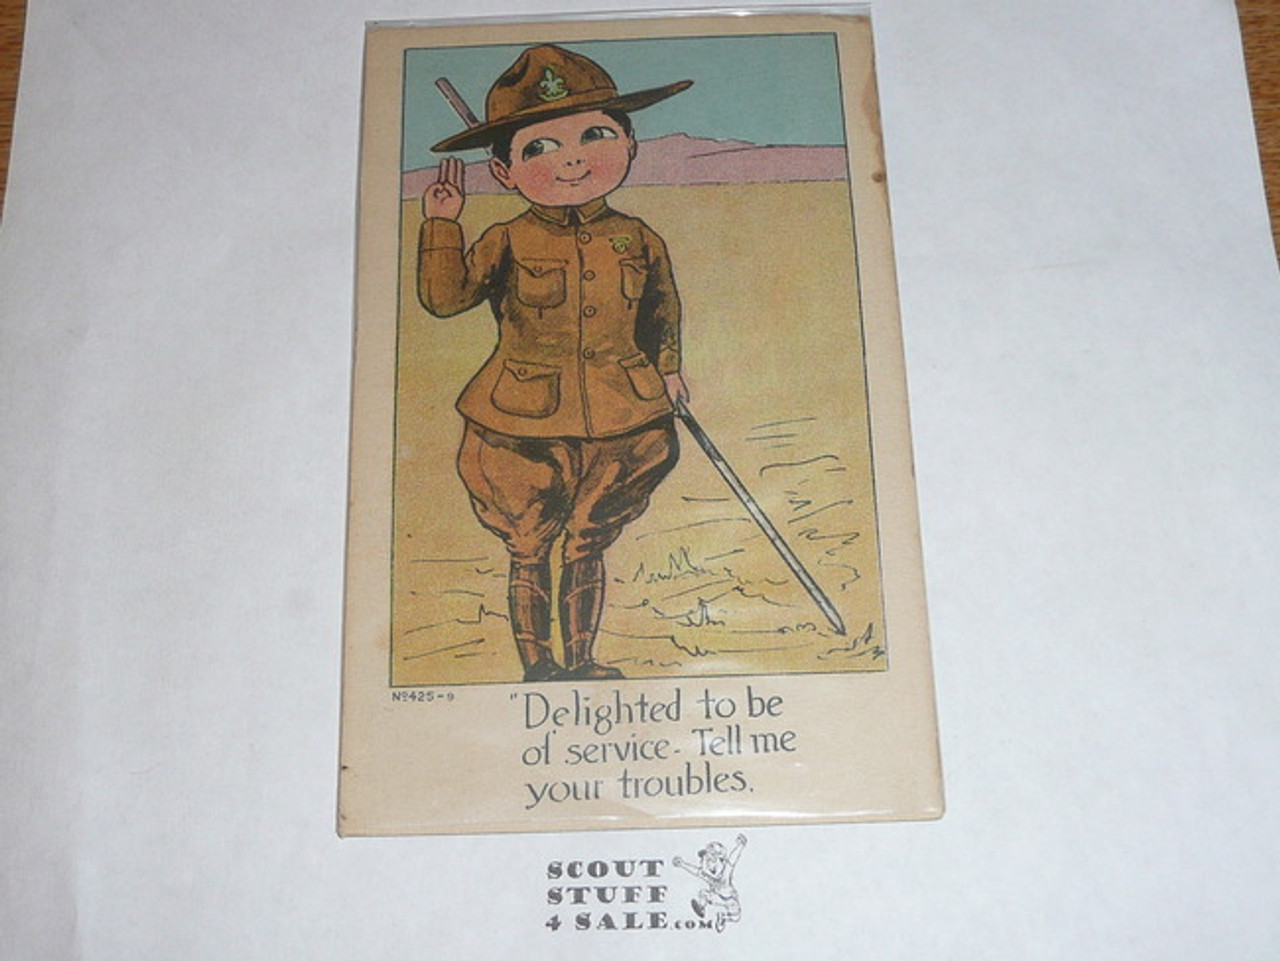 Boy Scout "Delighted to be of service - tell me your troubles" Post card, 1920's